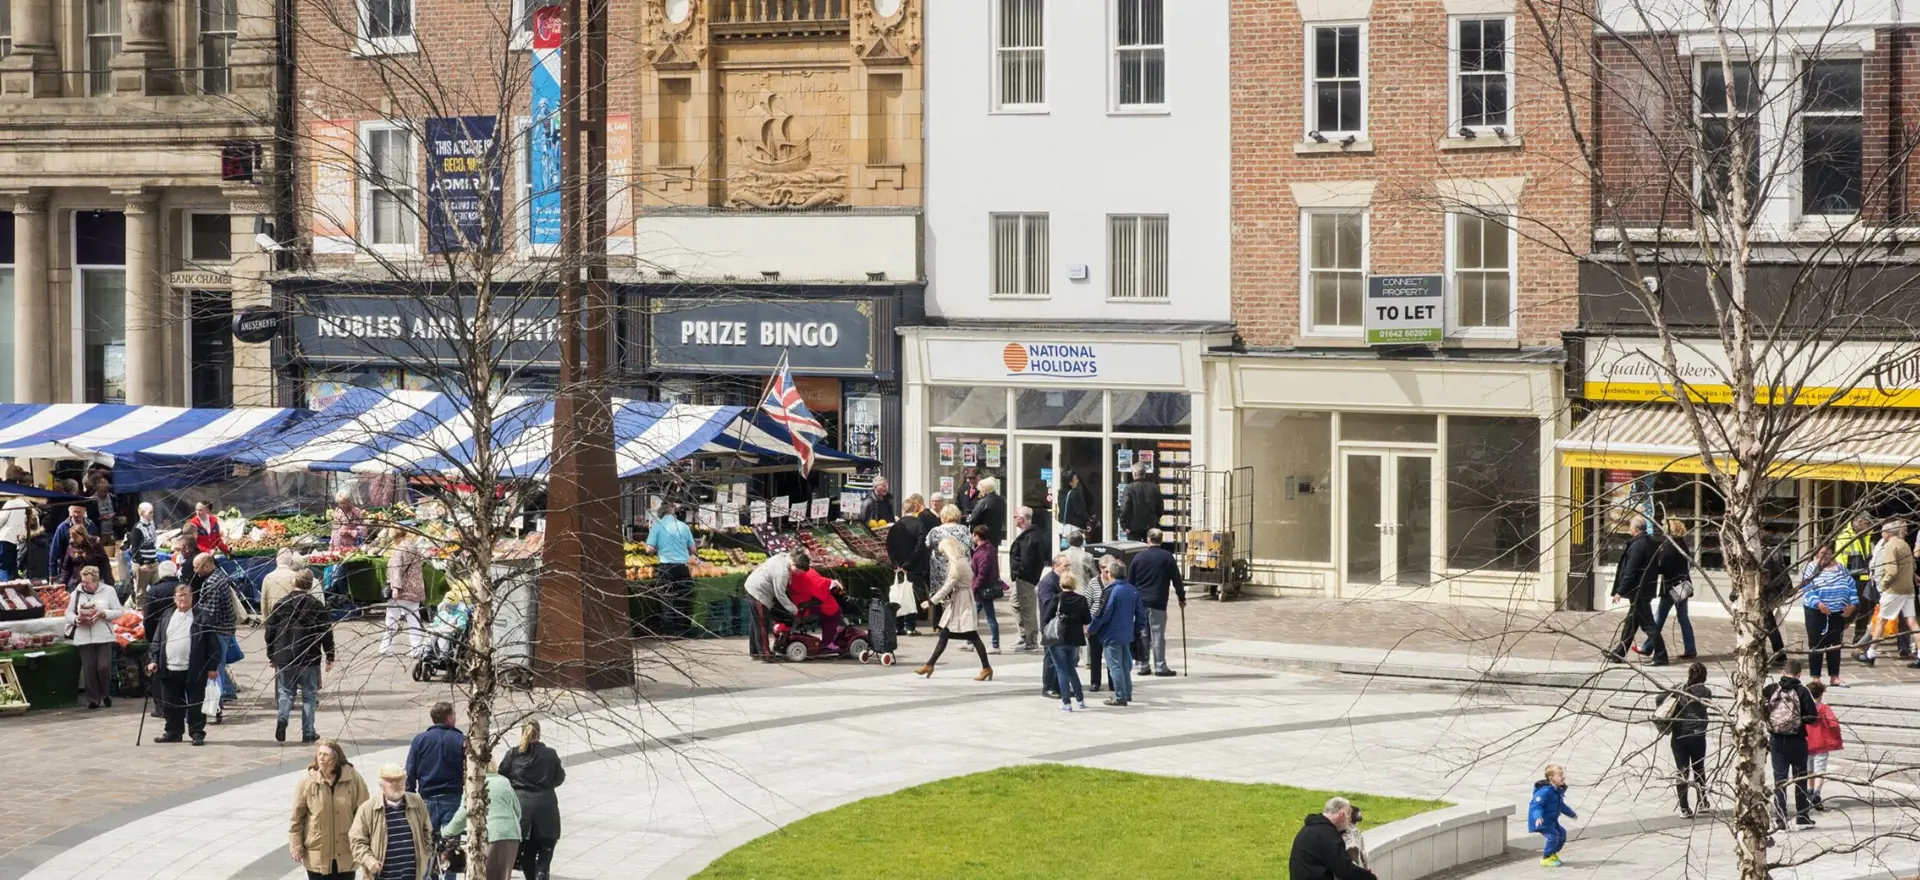 Lost in the Shuffle: Is planning reform leaving town centres behind?